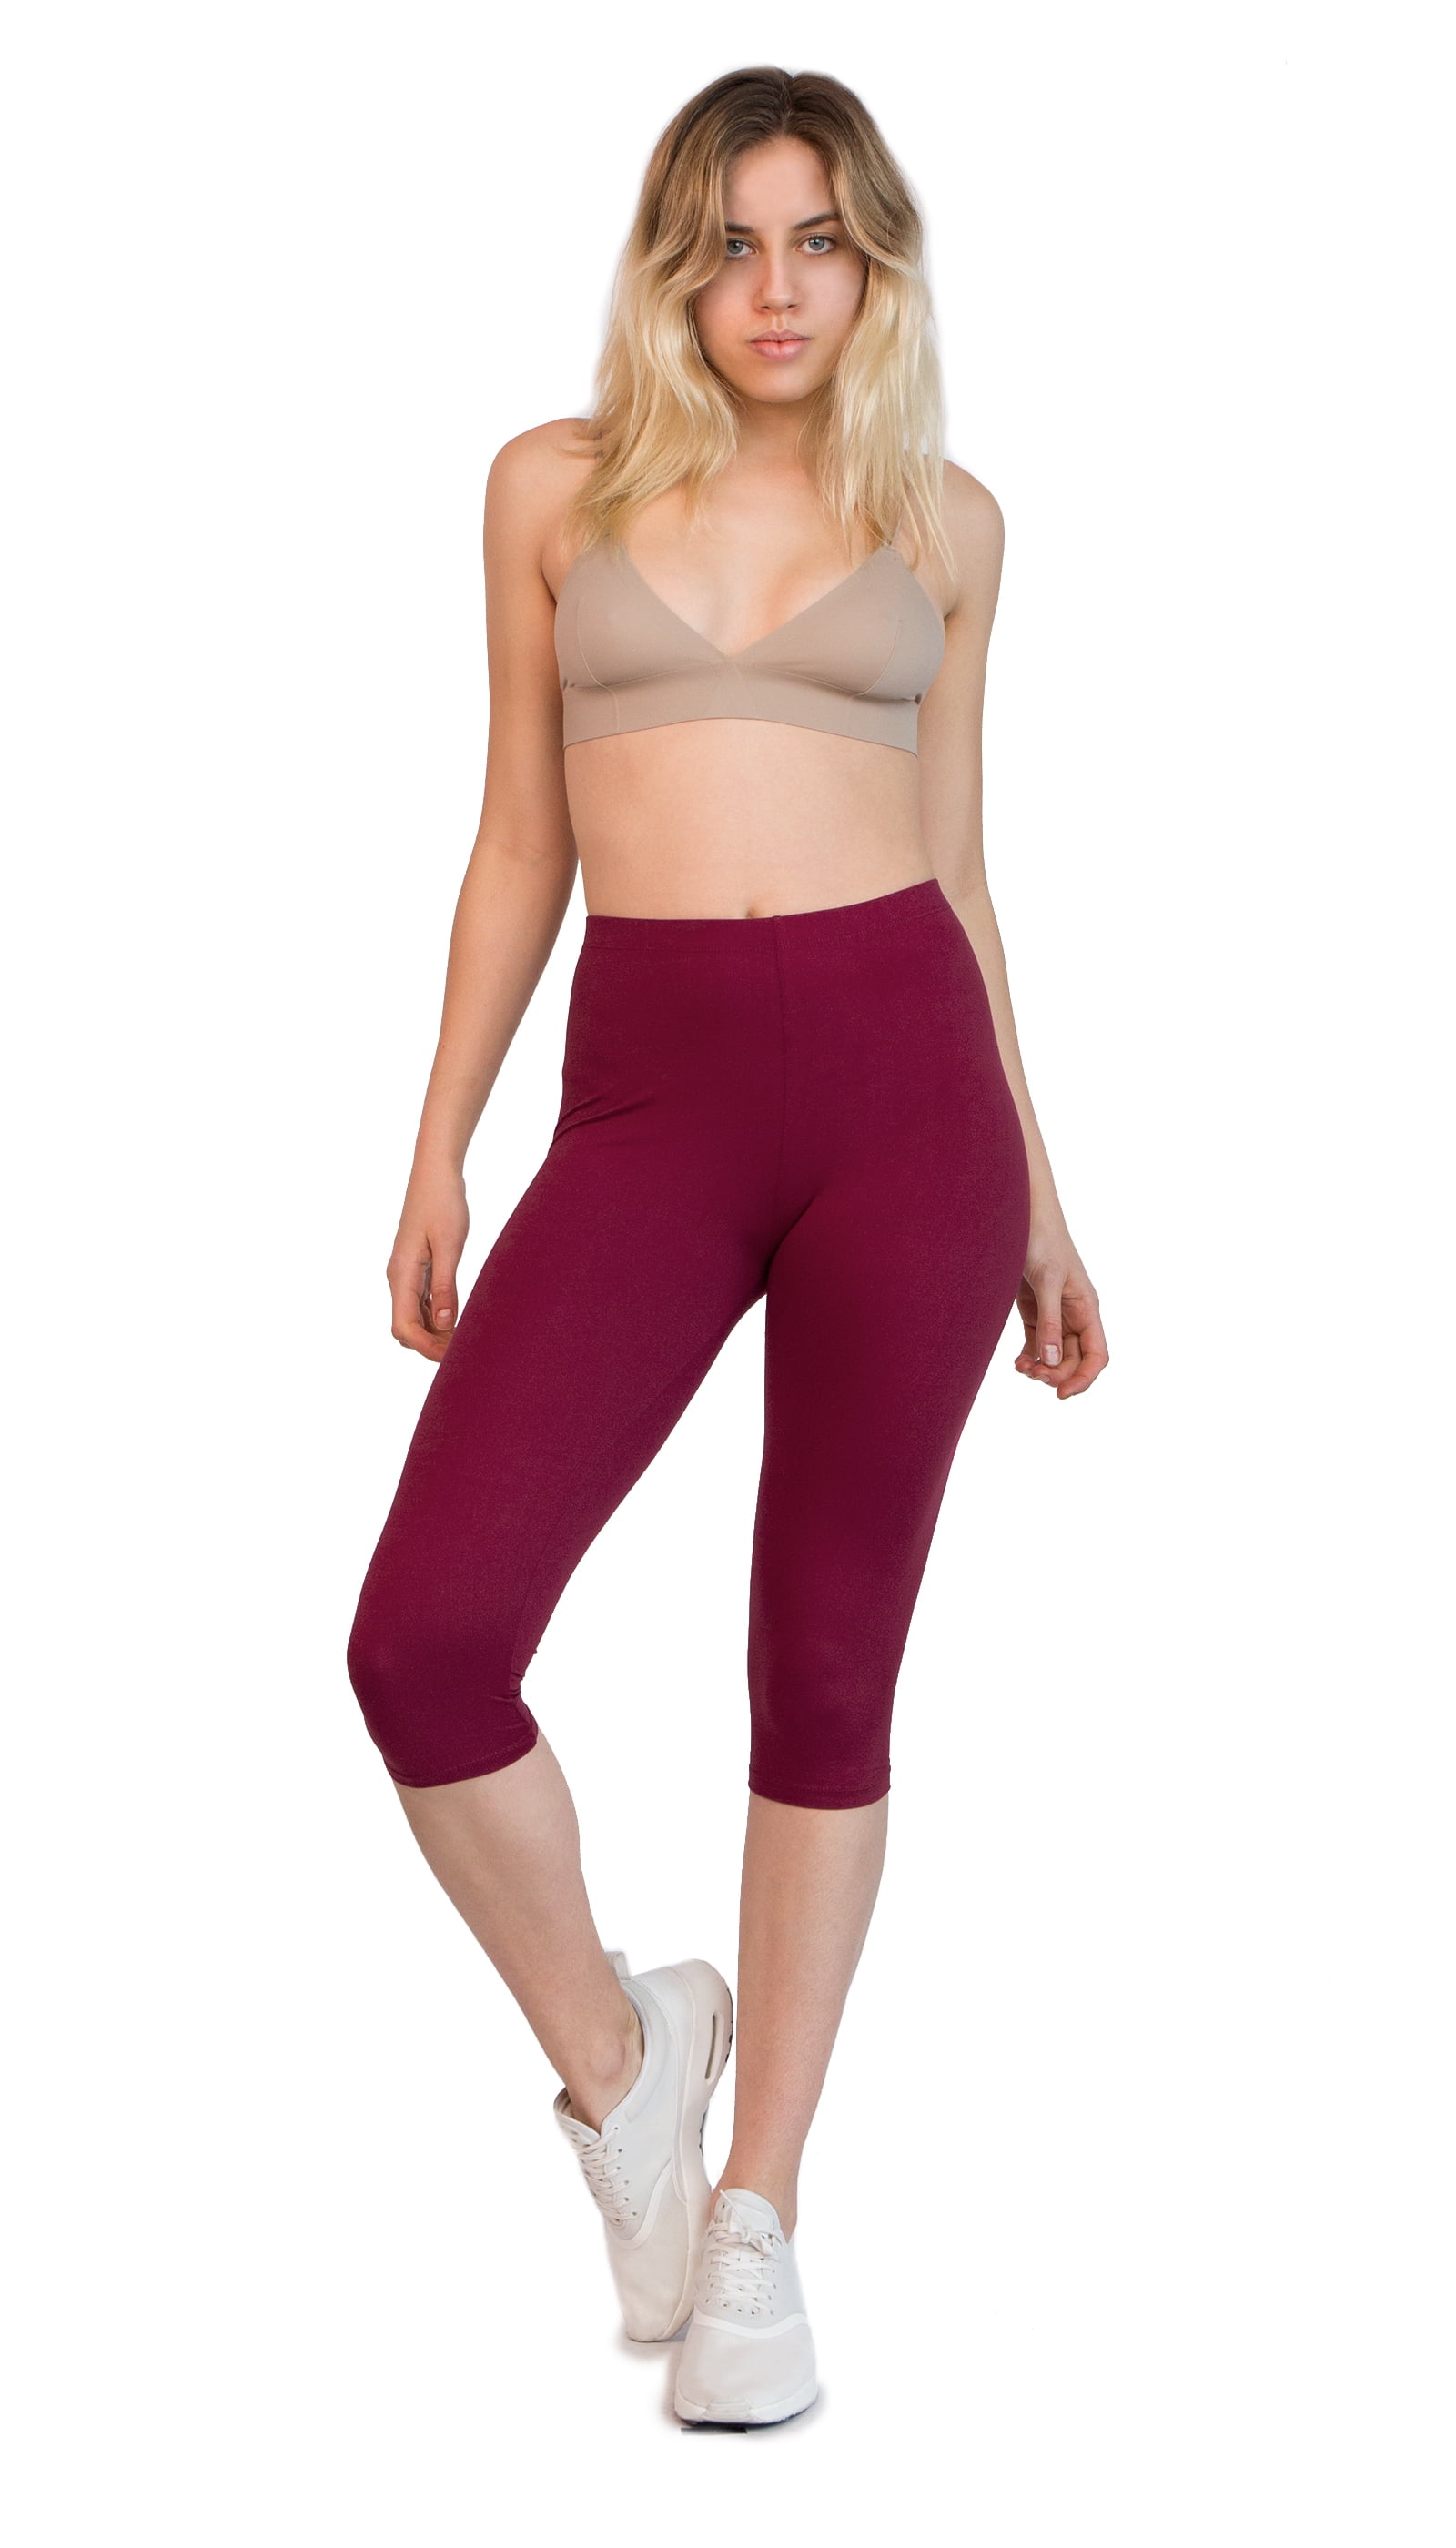 Leggings - One Size - 1 Inch Waistband - Mulberry 